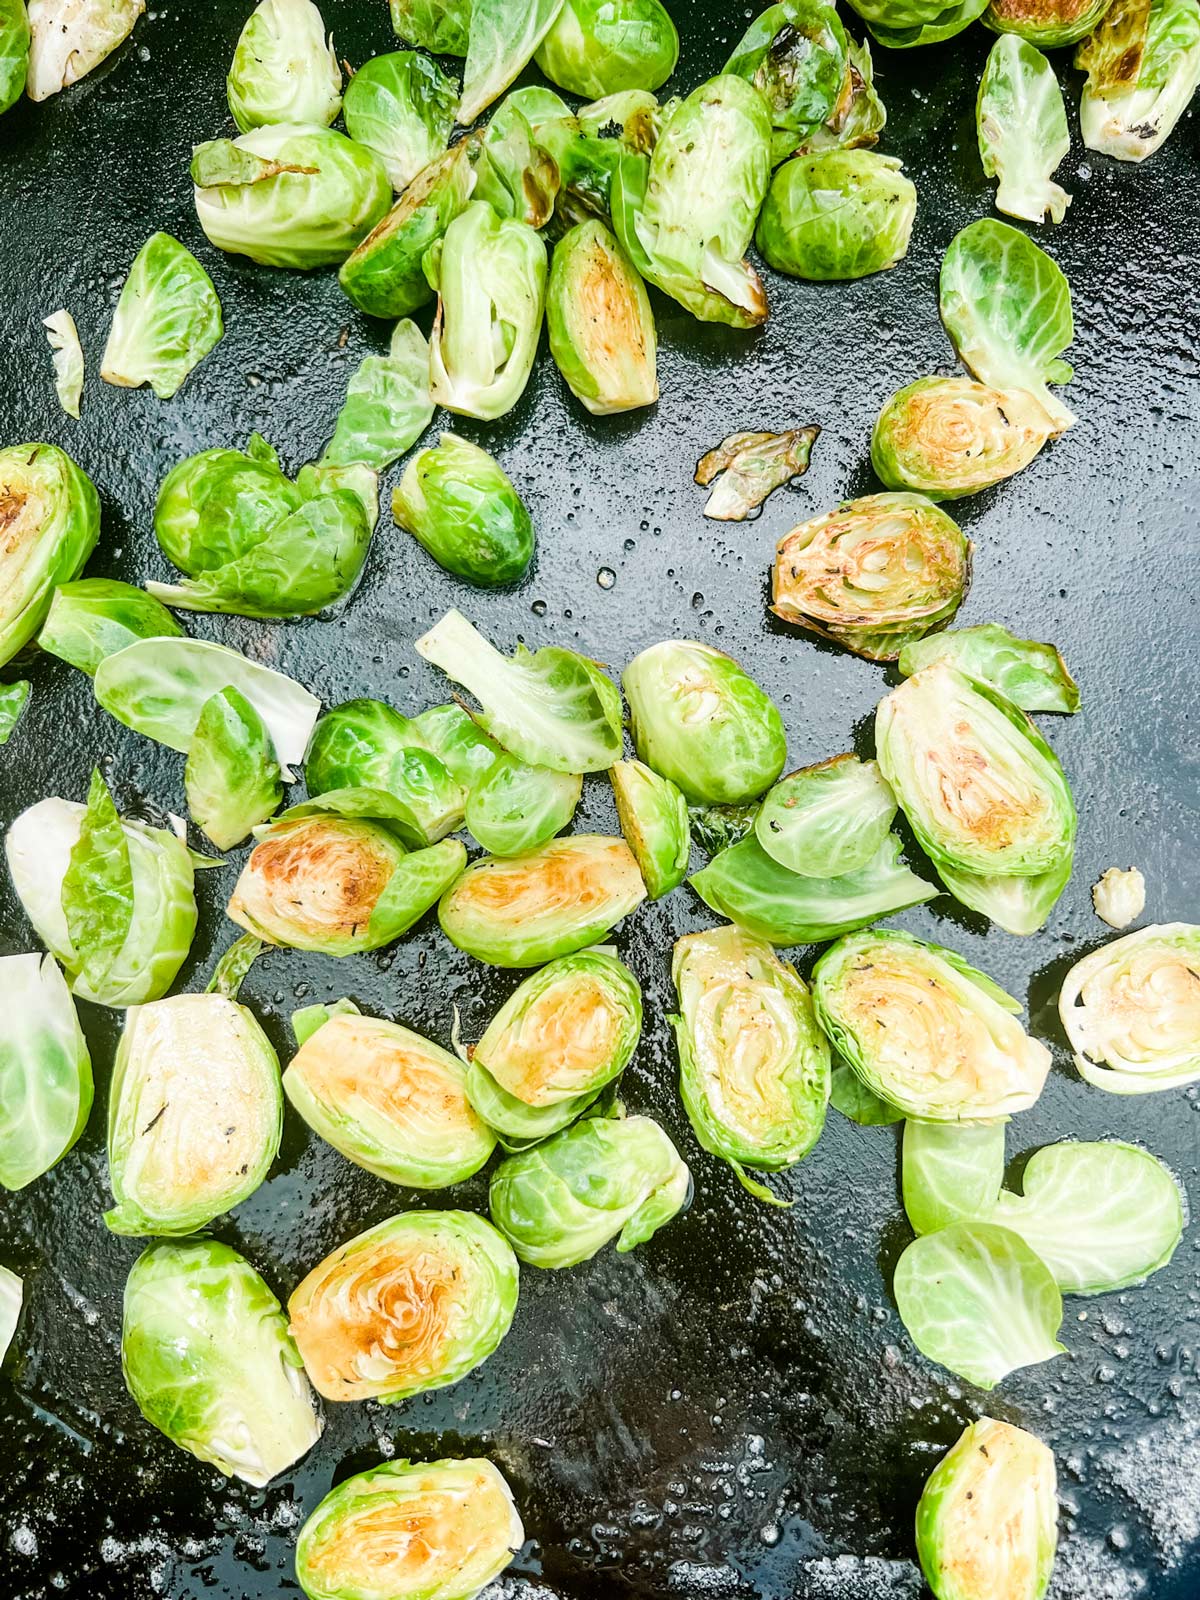 Brussels sprouts cooking on a Blackstone flattop griddle.